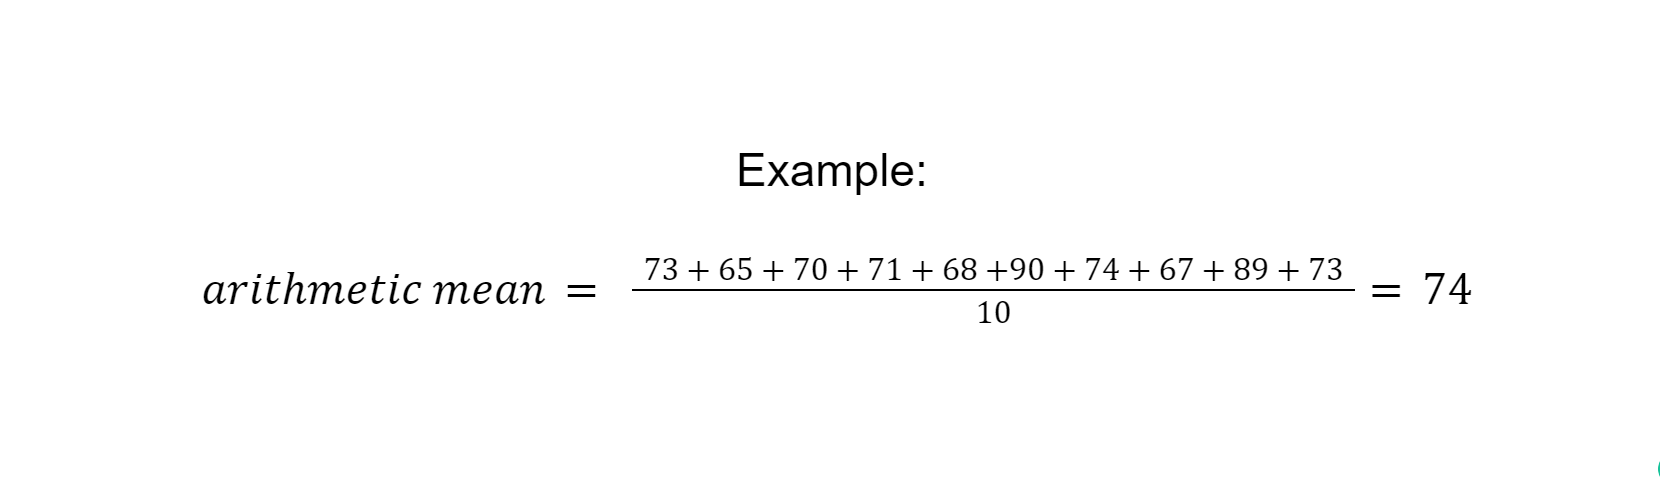 Example arithmetic mean